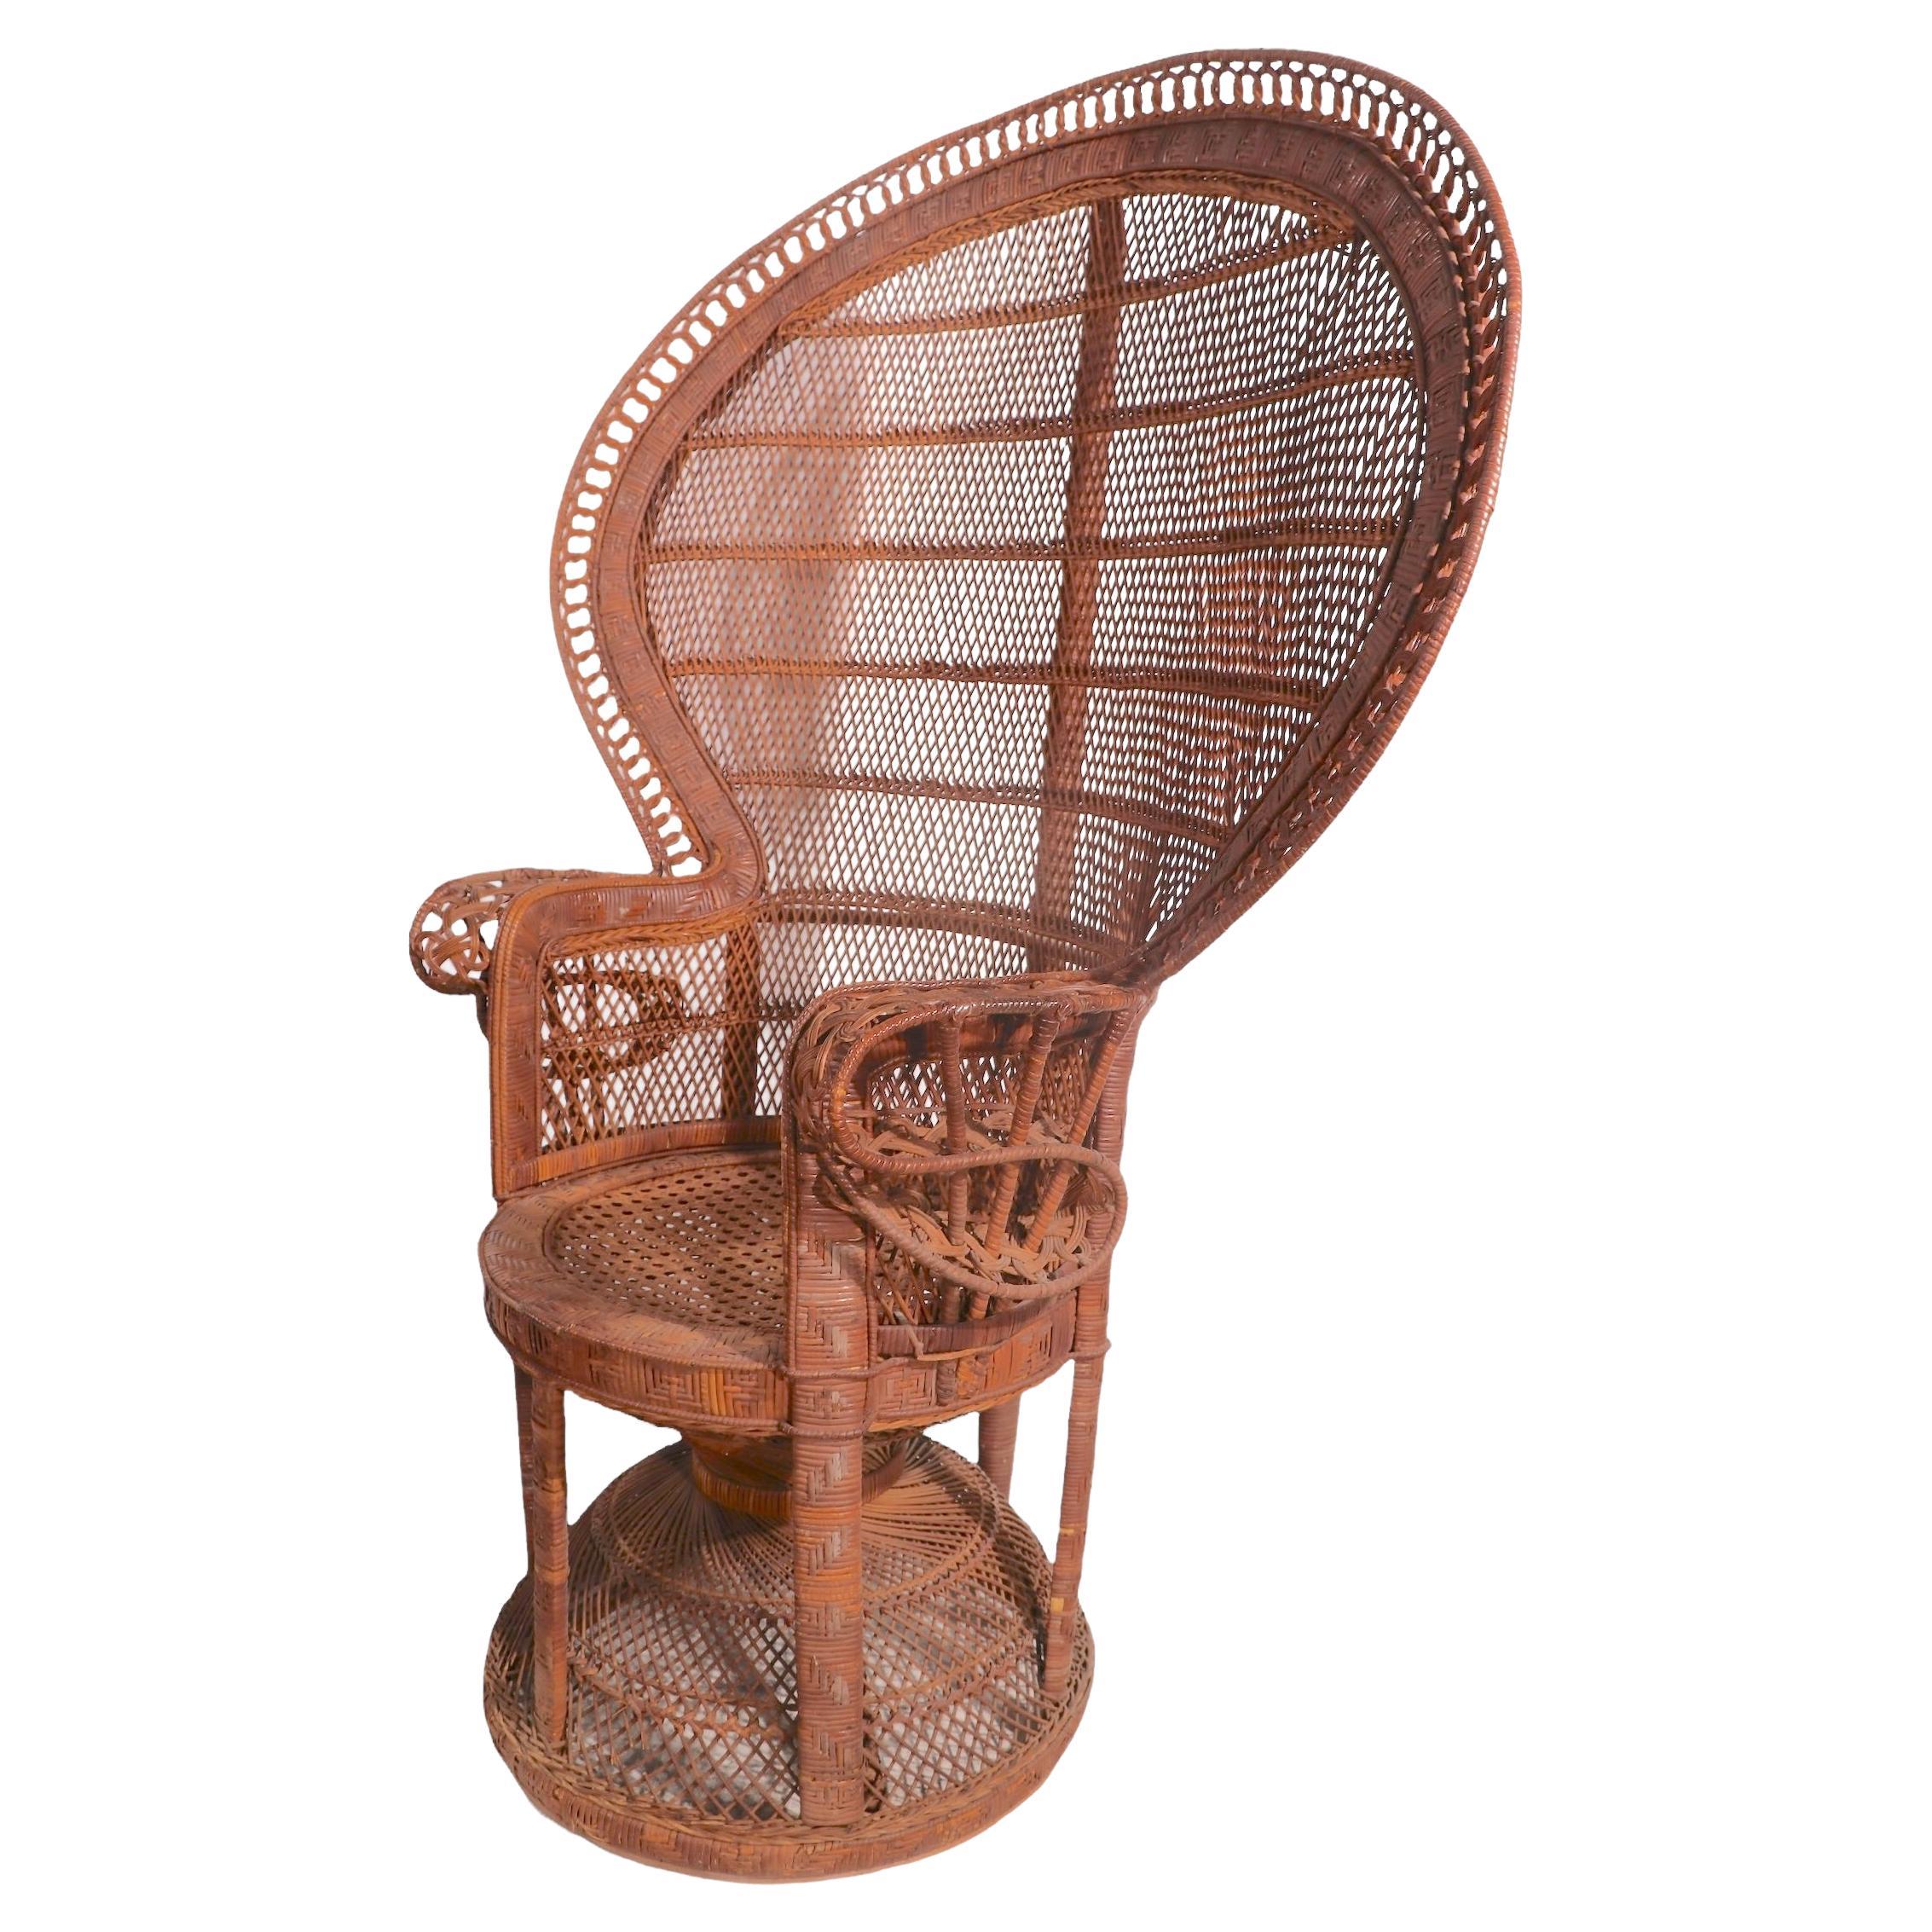 Vintage Woven Wicker Emmanuelle Chair circa 1970's For Sale at 1stDibs